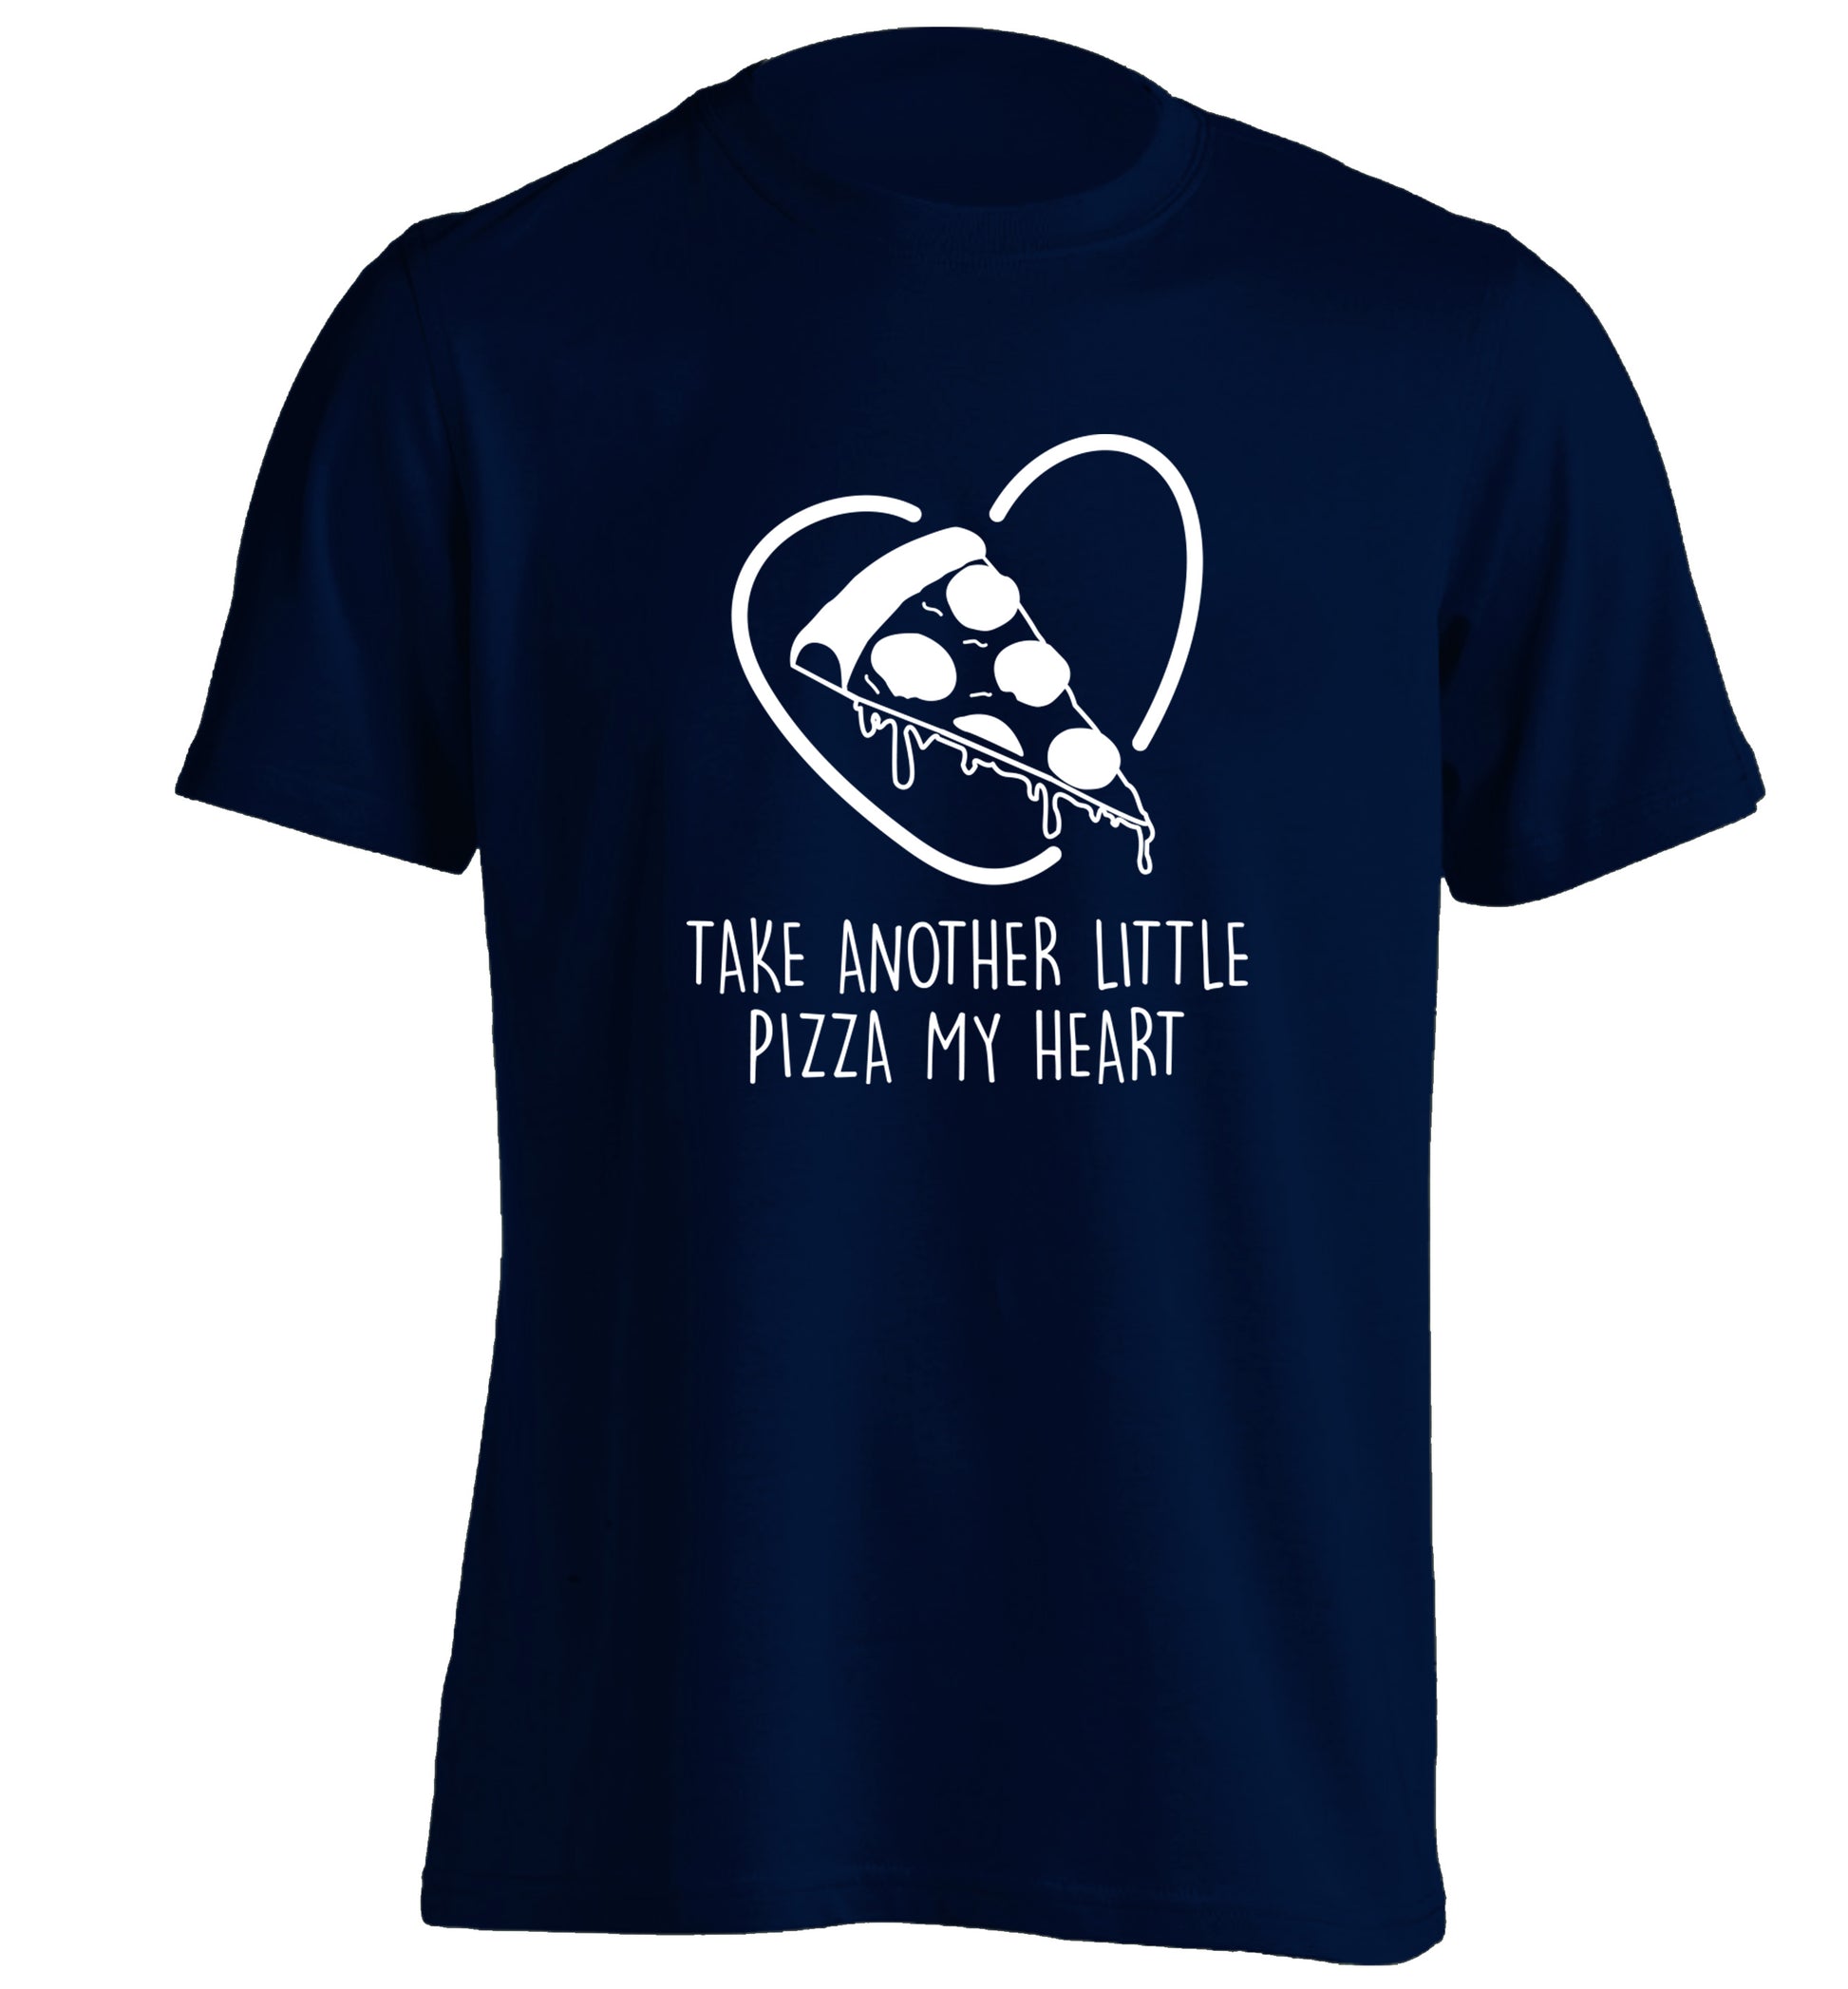 Take another little pizza my heart adults unisex navy Tshirt 2XL